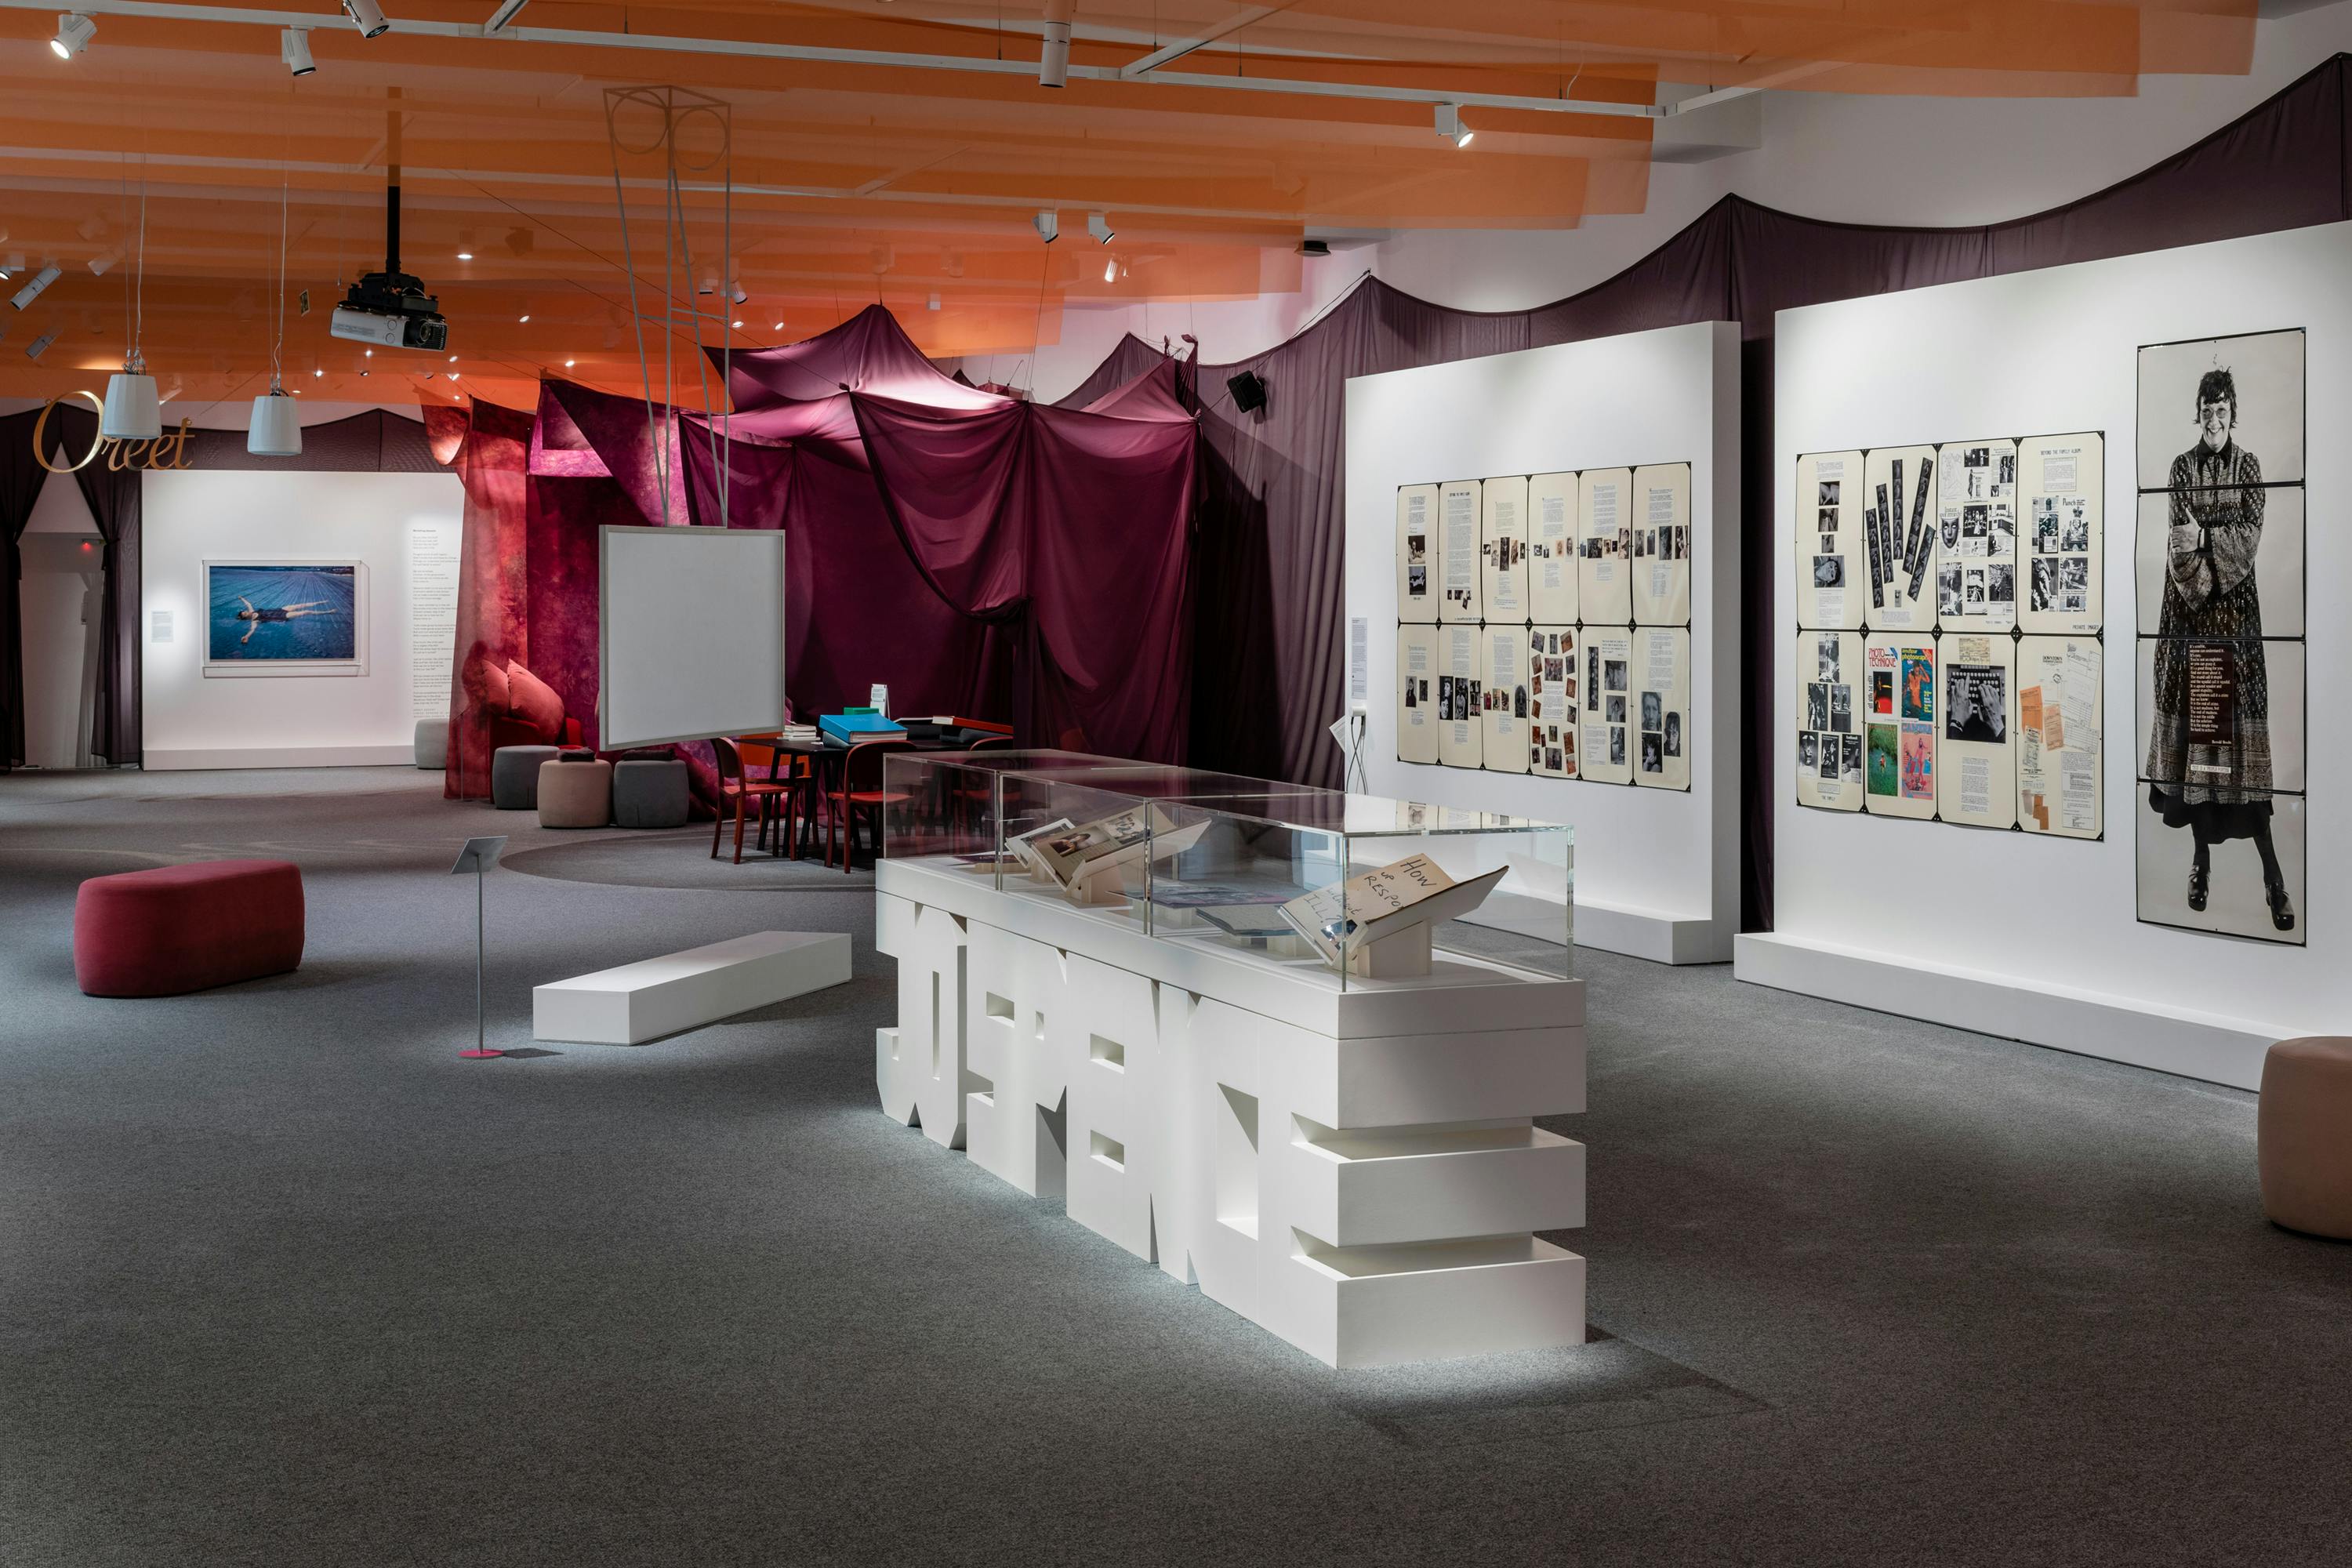 The installation includes large photographs and montages of Jo Spence on white walls. In the foreground of the image a vitrine is shaped in Jo Spence's name and contains notebooks and diaries. The gallery walls and ceiling are covered in peach coloured and dark brown fabrics creating a comforting environment. 